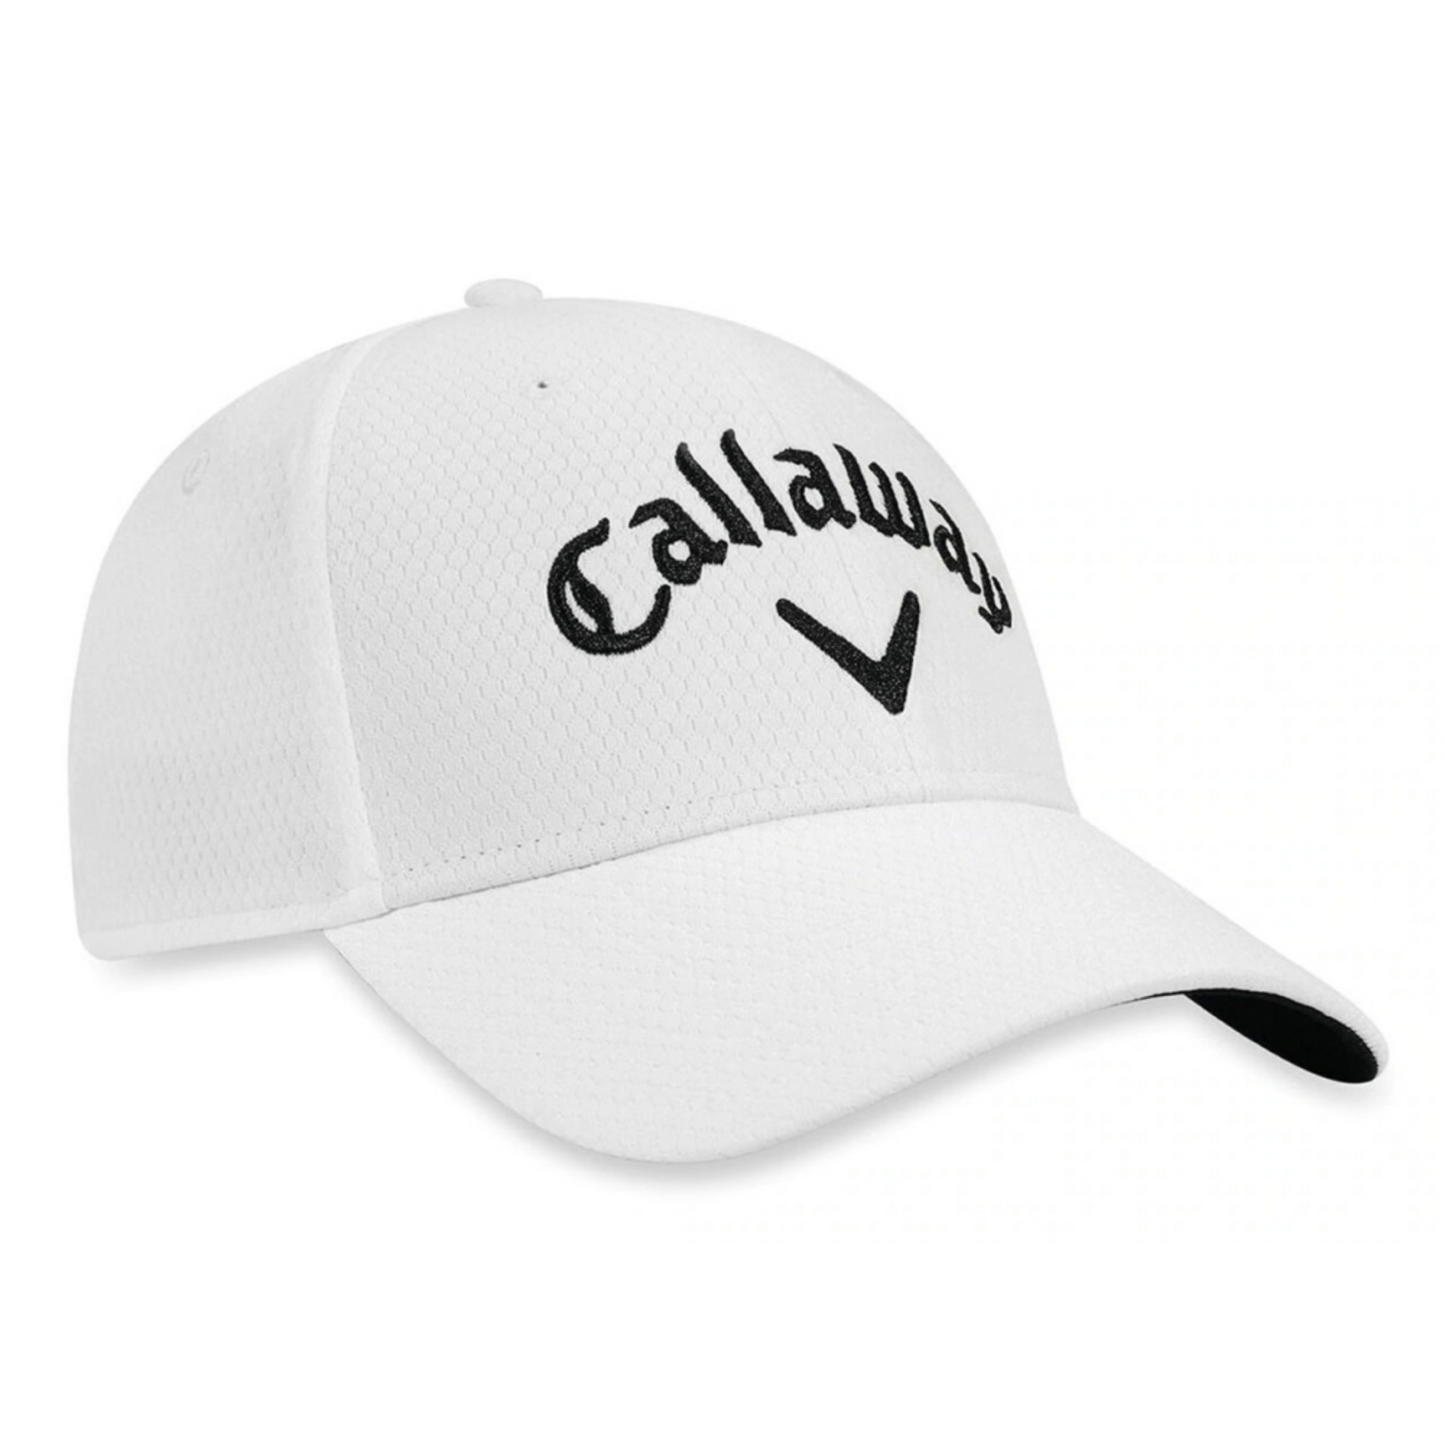 Callaway Performance Side Crested Cap